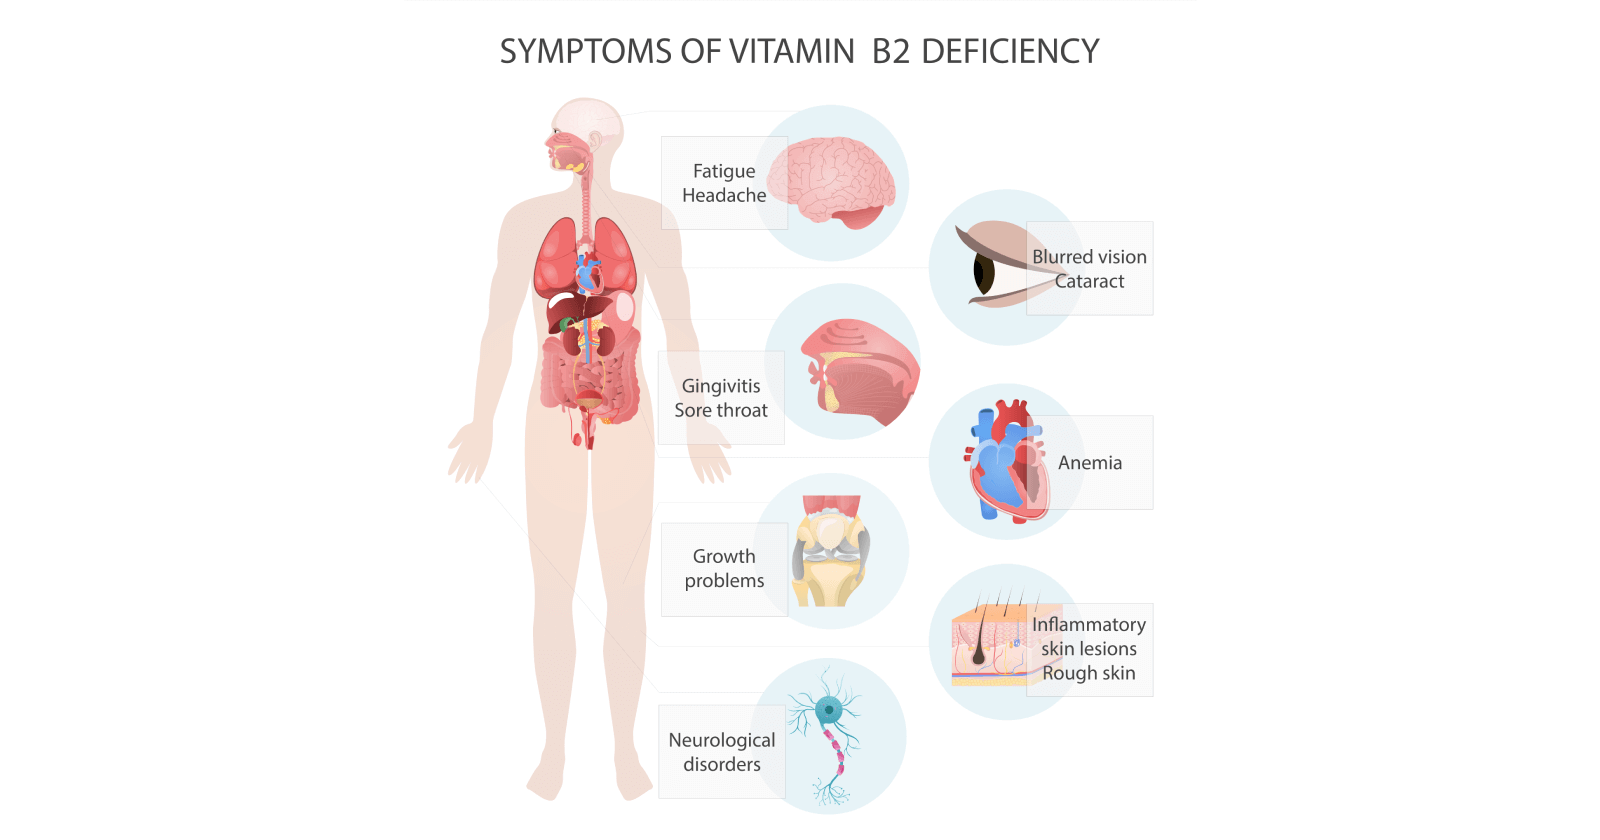 Learn About the Causes and Symptoms of Vitamin B2 Deficiency